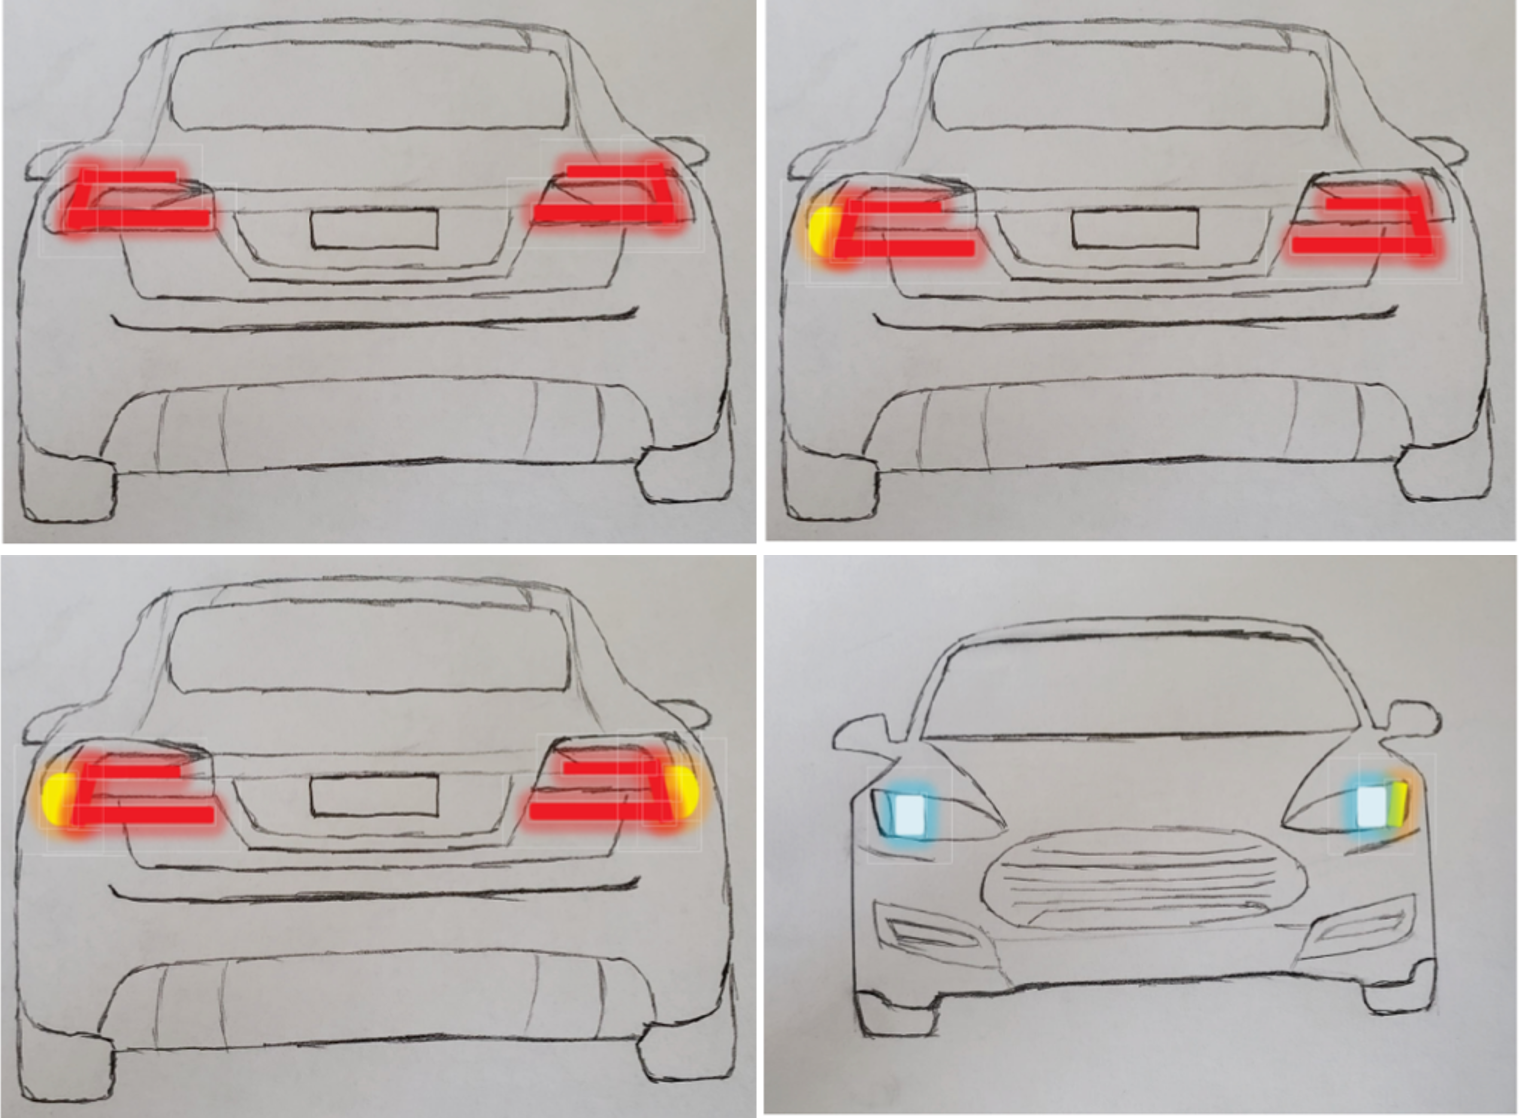 Examples of signaling with BICADAS, clockwise from upper left: slow down indicated by having the brake lights flash; slow down signal + left turn light solid to indicate the left lane is available; slow down signal + both turn lights solid to indicate lan